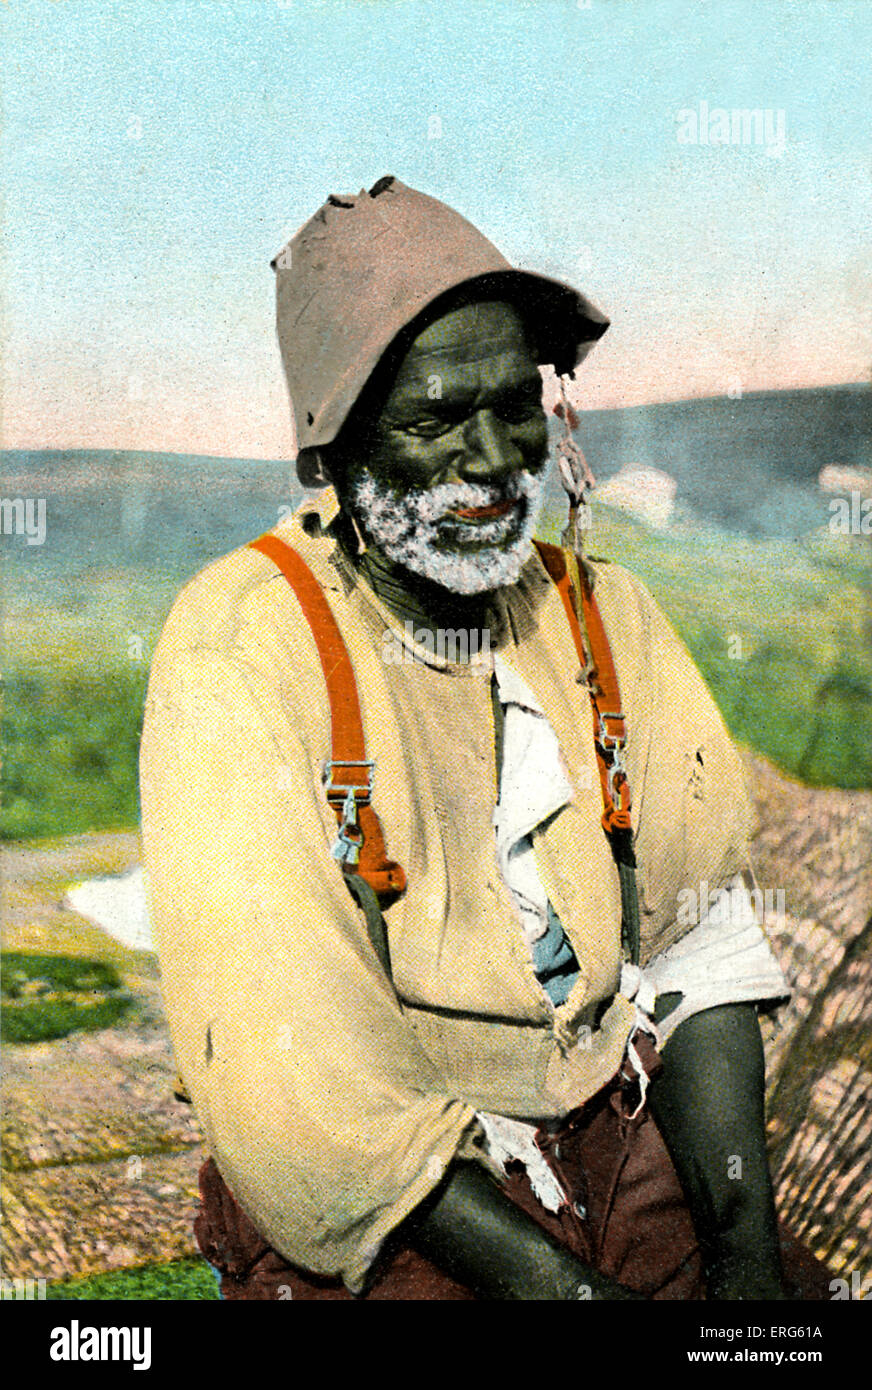 Portrait of a black man on an early twentieth century American postcard, captioned 'Uncle Tom'. Uncle Tom is a term derived from Harriet Beecher Stowe's 1852 novel Uncle Tom's Cabin, and refers to a black person who is subservient to white people. Published by Adolph Selige Pub. Co., St. Louis. Stock Photo